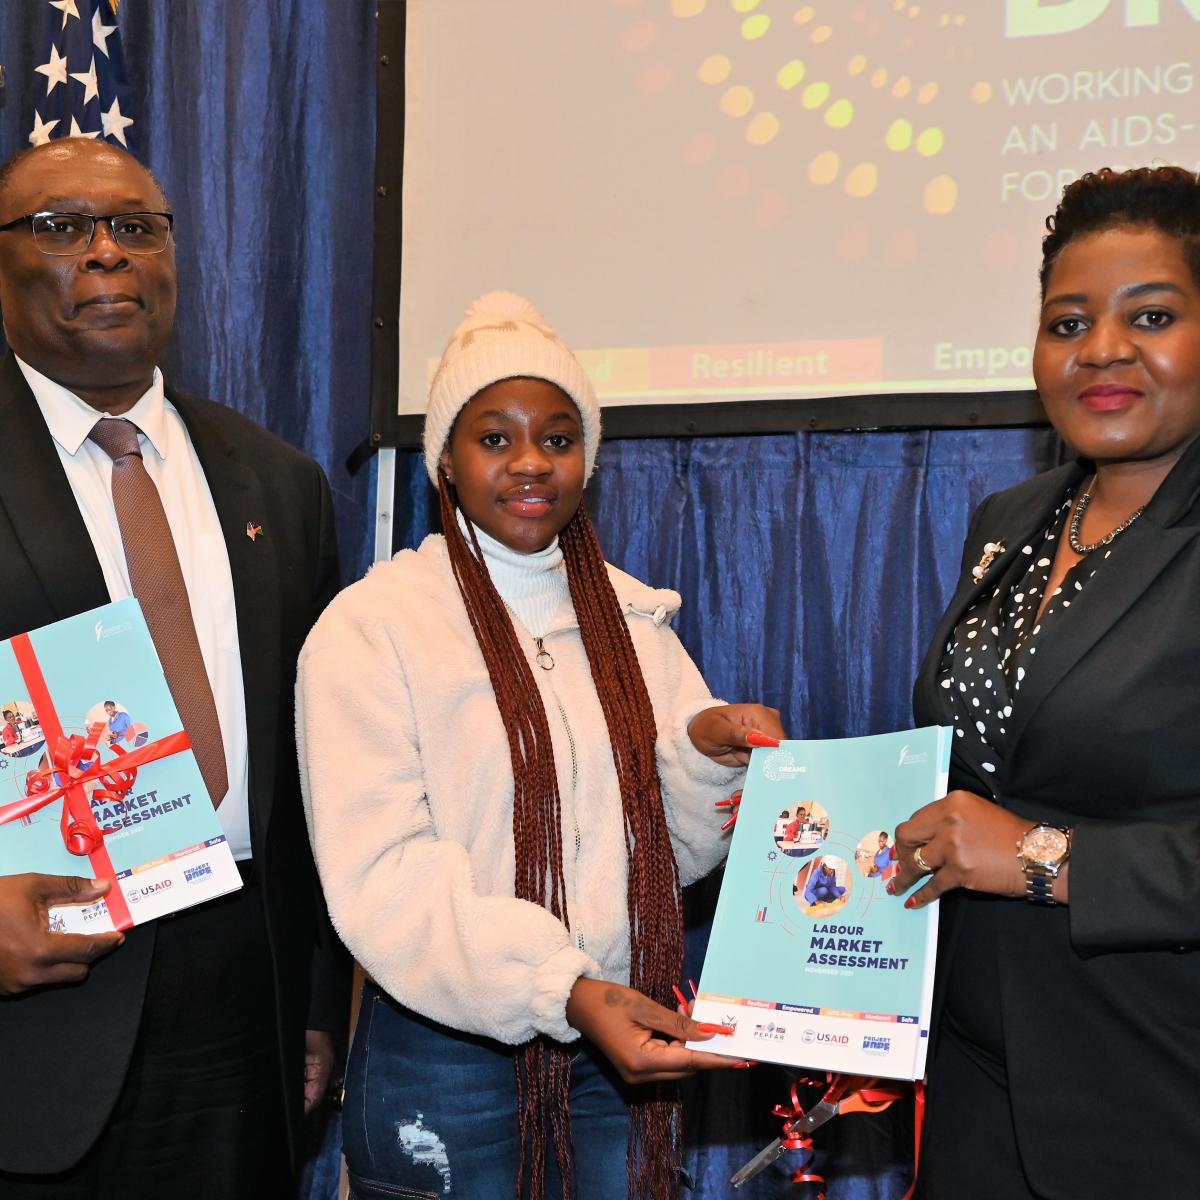 New Labor Market Assessment Identifies Employment and Entrepreneurial Opportunities for Young Namibian Women